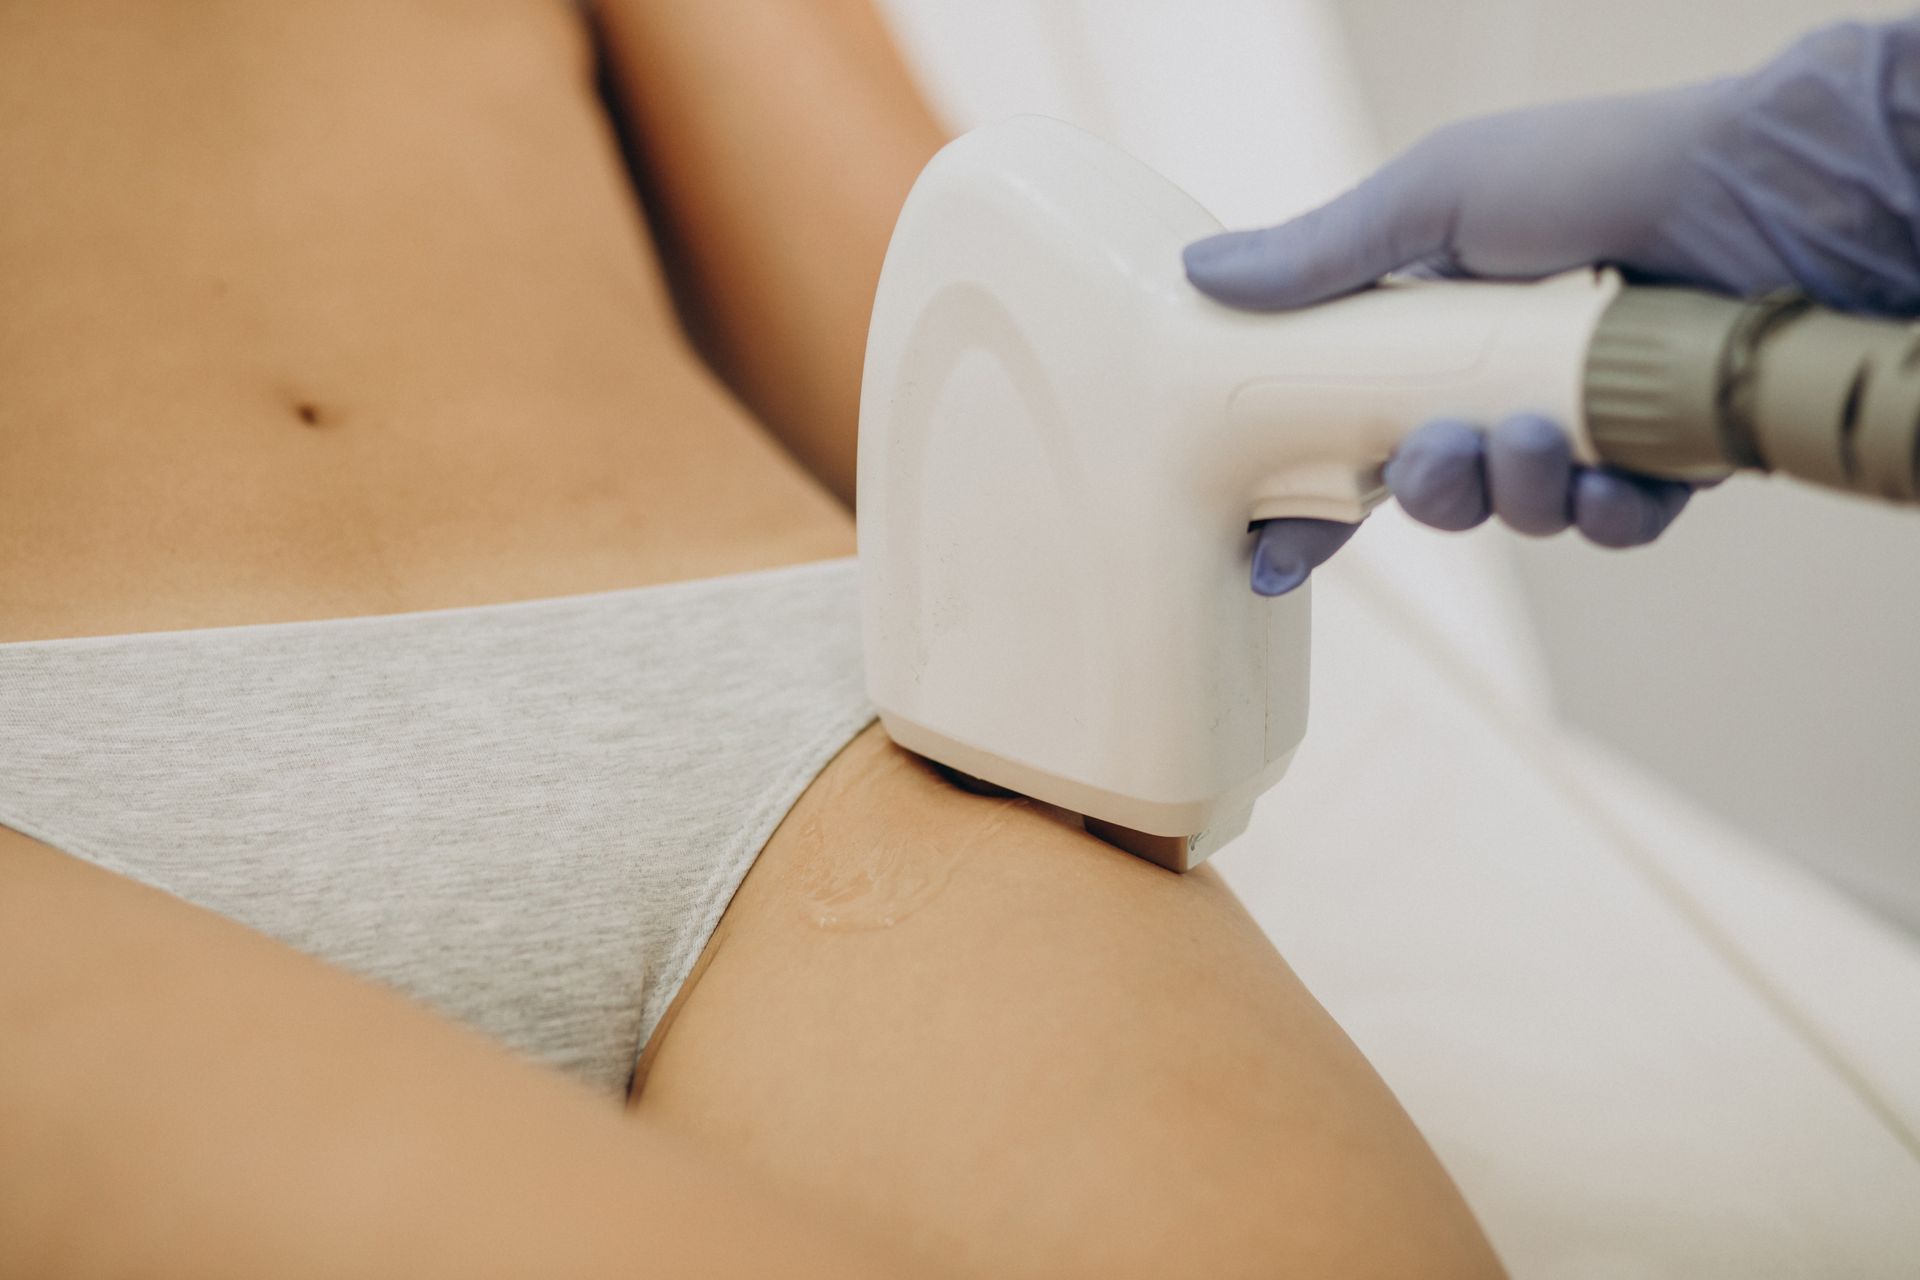 A woman is getting a laser hair removal treatment on her underwear.